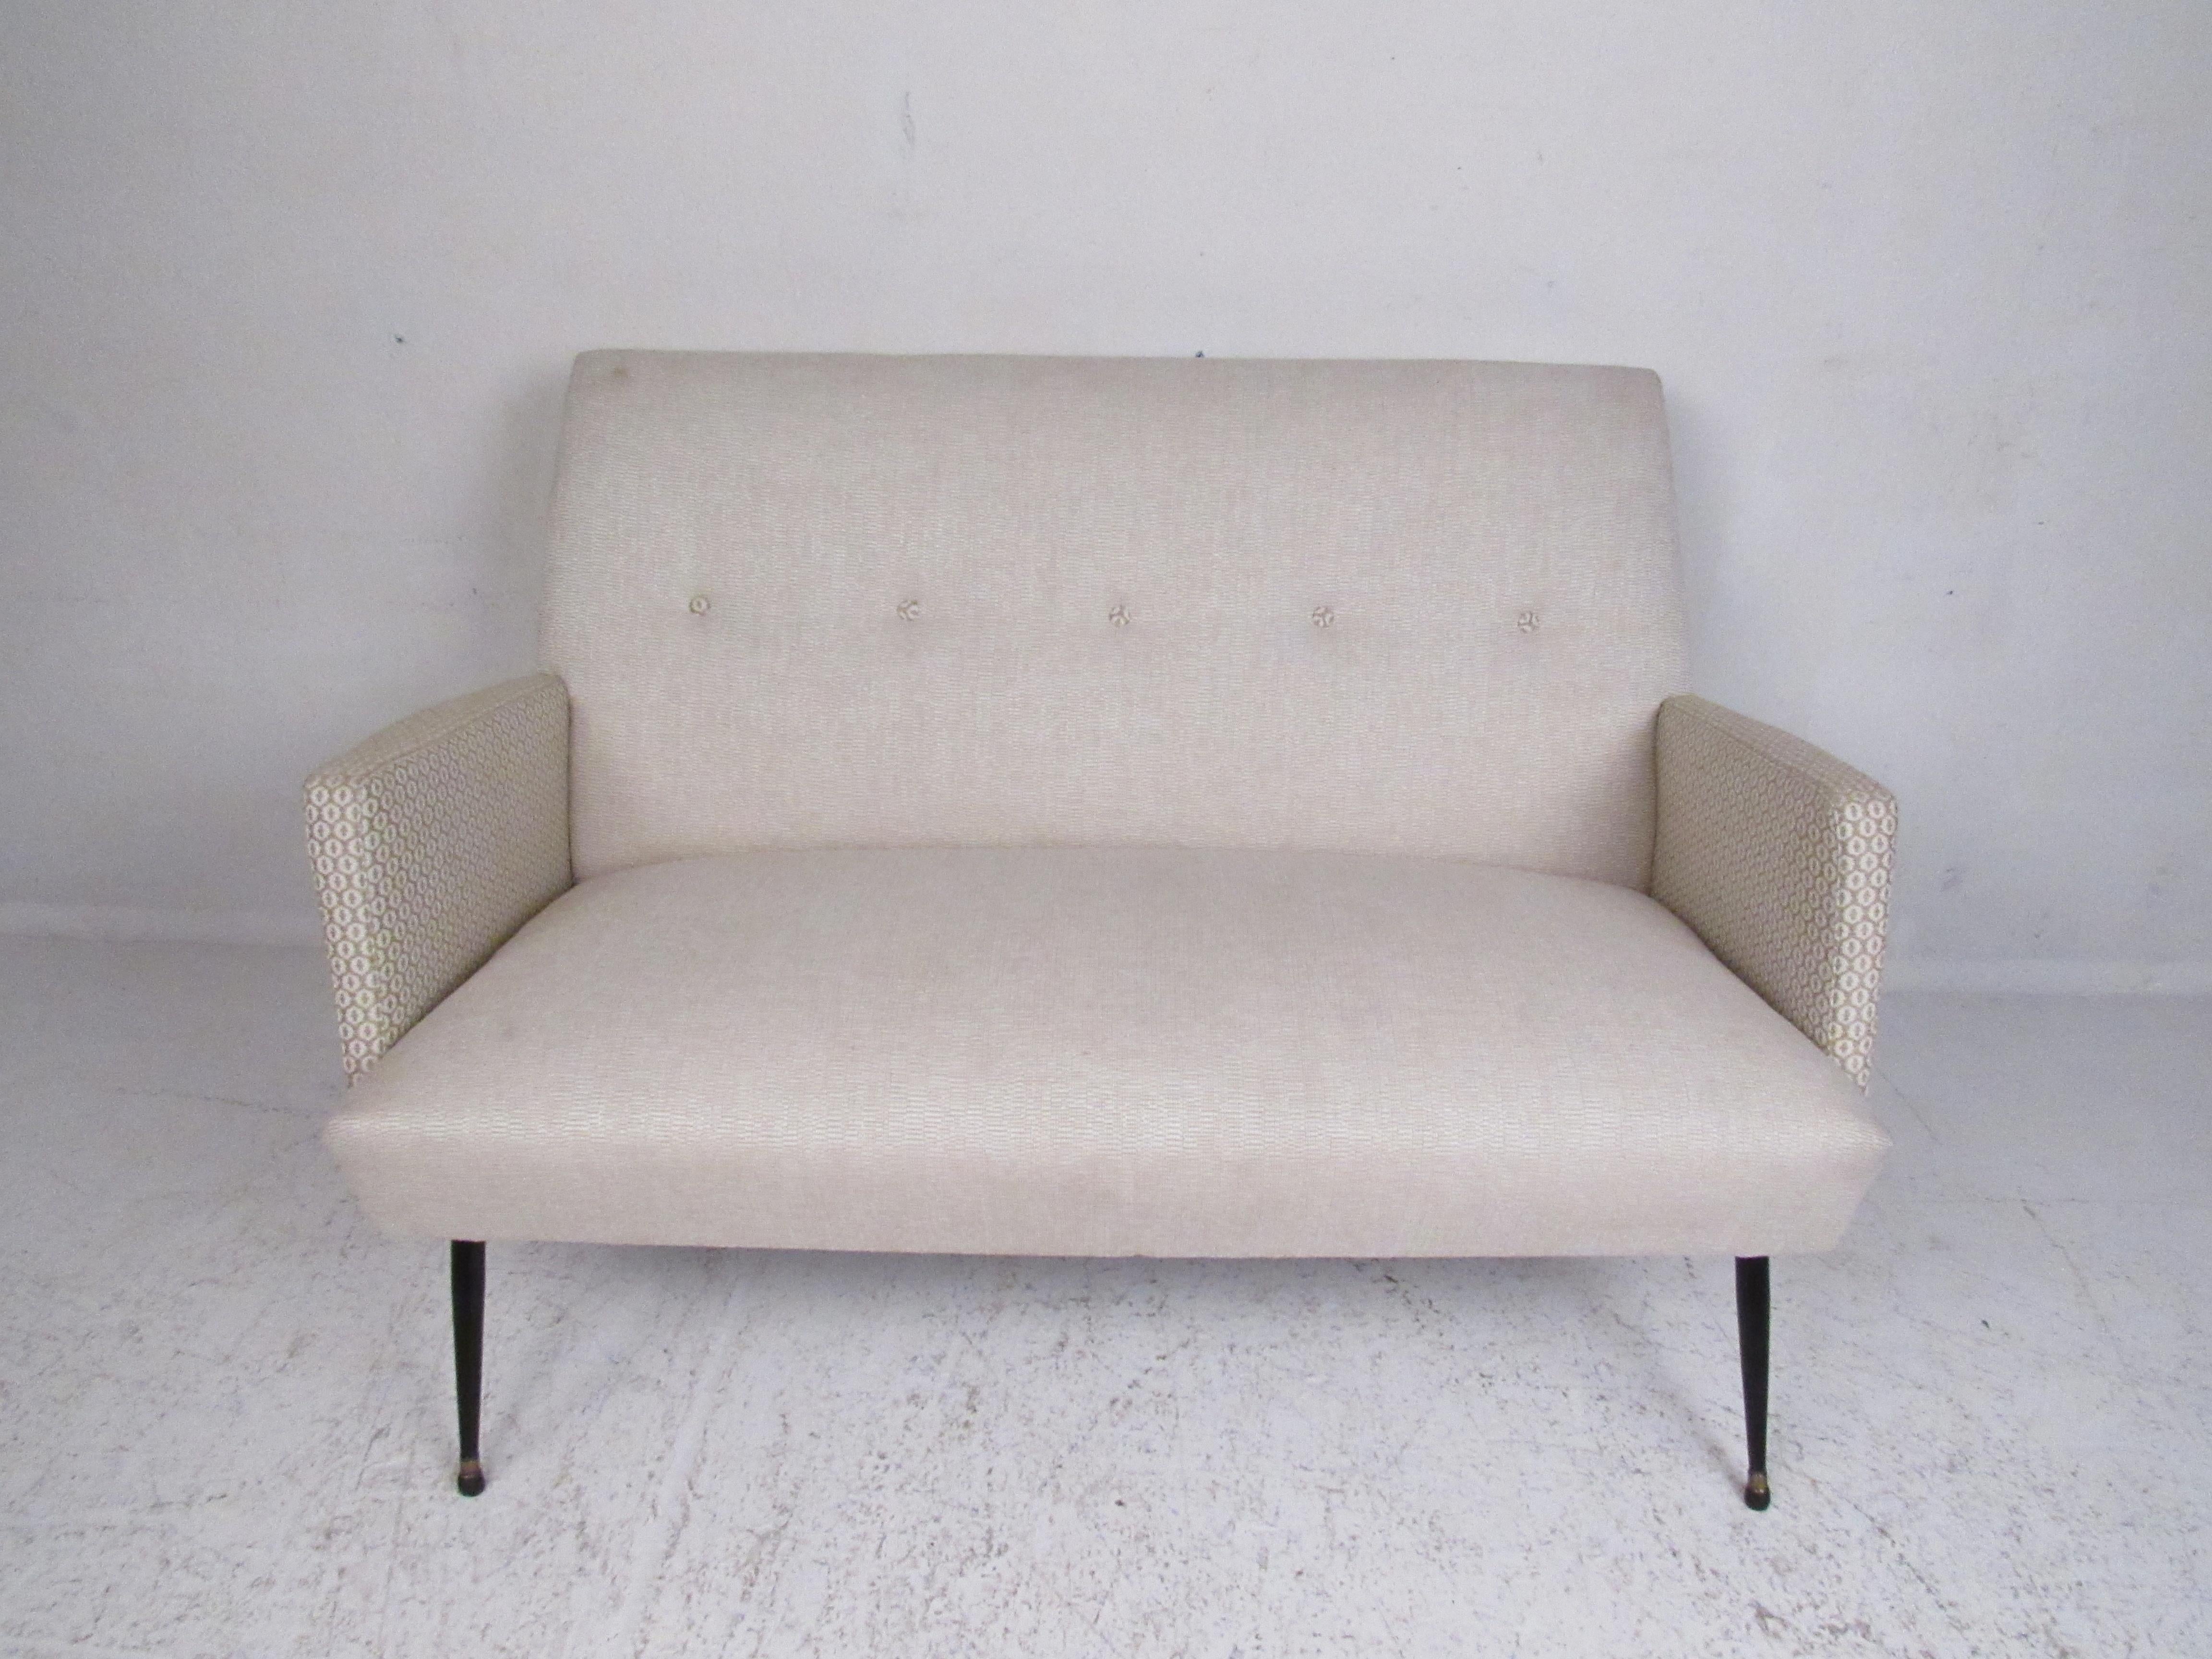 This stunning vintage modern Italian sofa boasts splayed metal legs with brass feet and a tufted backrest. A comfortable settee that has cream-colored upholstery with decorative armrests. This stylish sofa makes the perfect addition to any seating